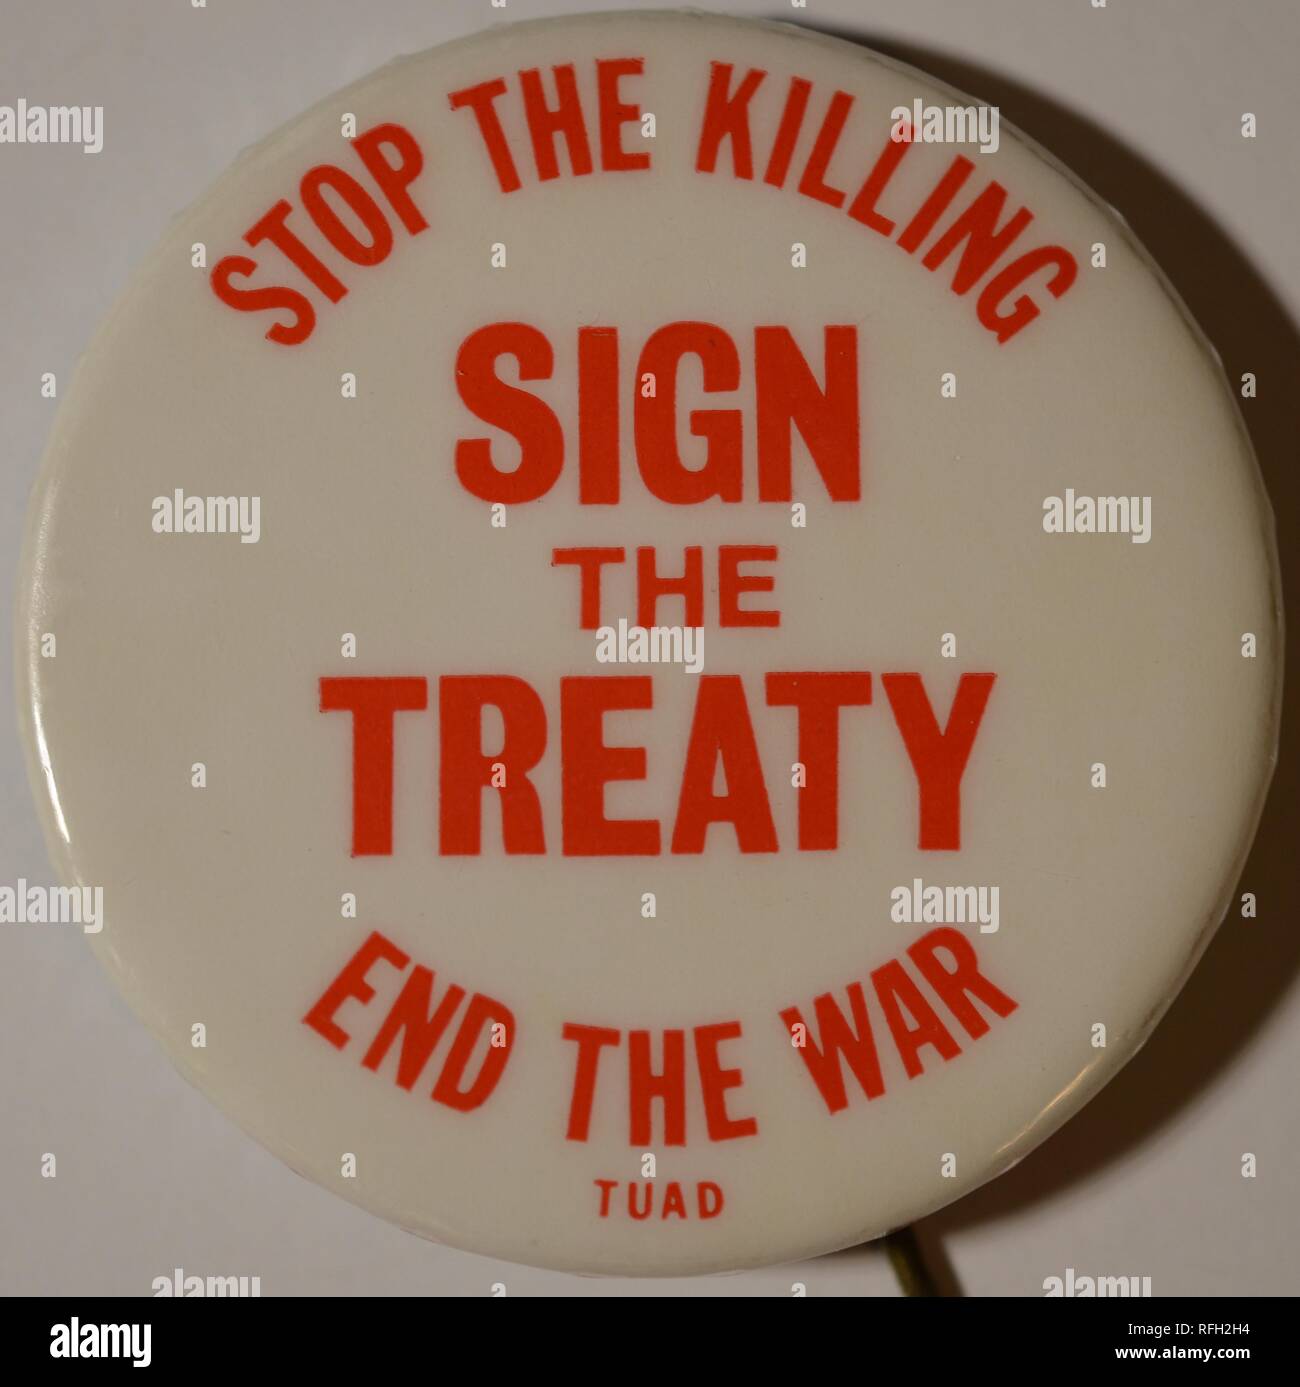 White and red, anti-war, pin-back button or badge, with the text 'Stop The Killing, Sign The Treaty, End the War,' referring to the Paris Peace Accords or the Agreement on Ending the War and Restoring Peace in Vietnam, with 'TUAD,' possibly an acronym for the group which produced the pin, in smaller text at the bottom of the button, manufactured during the Vietnam War, 1973. () Stock Photo